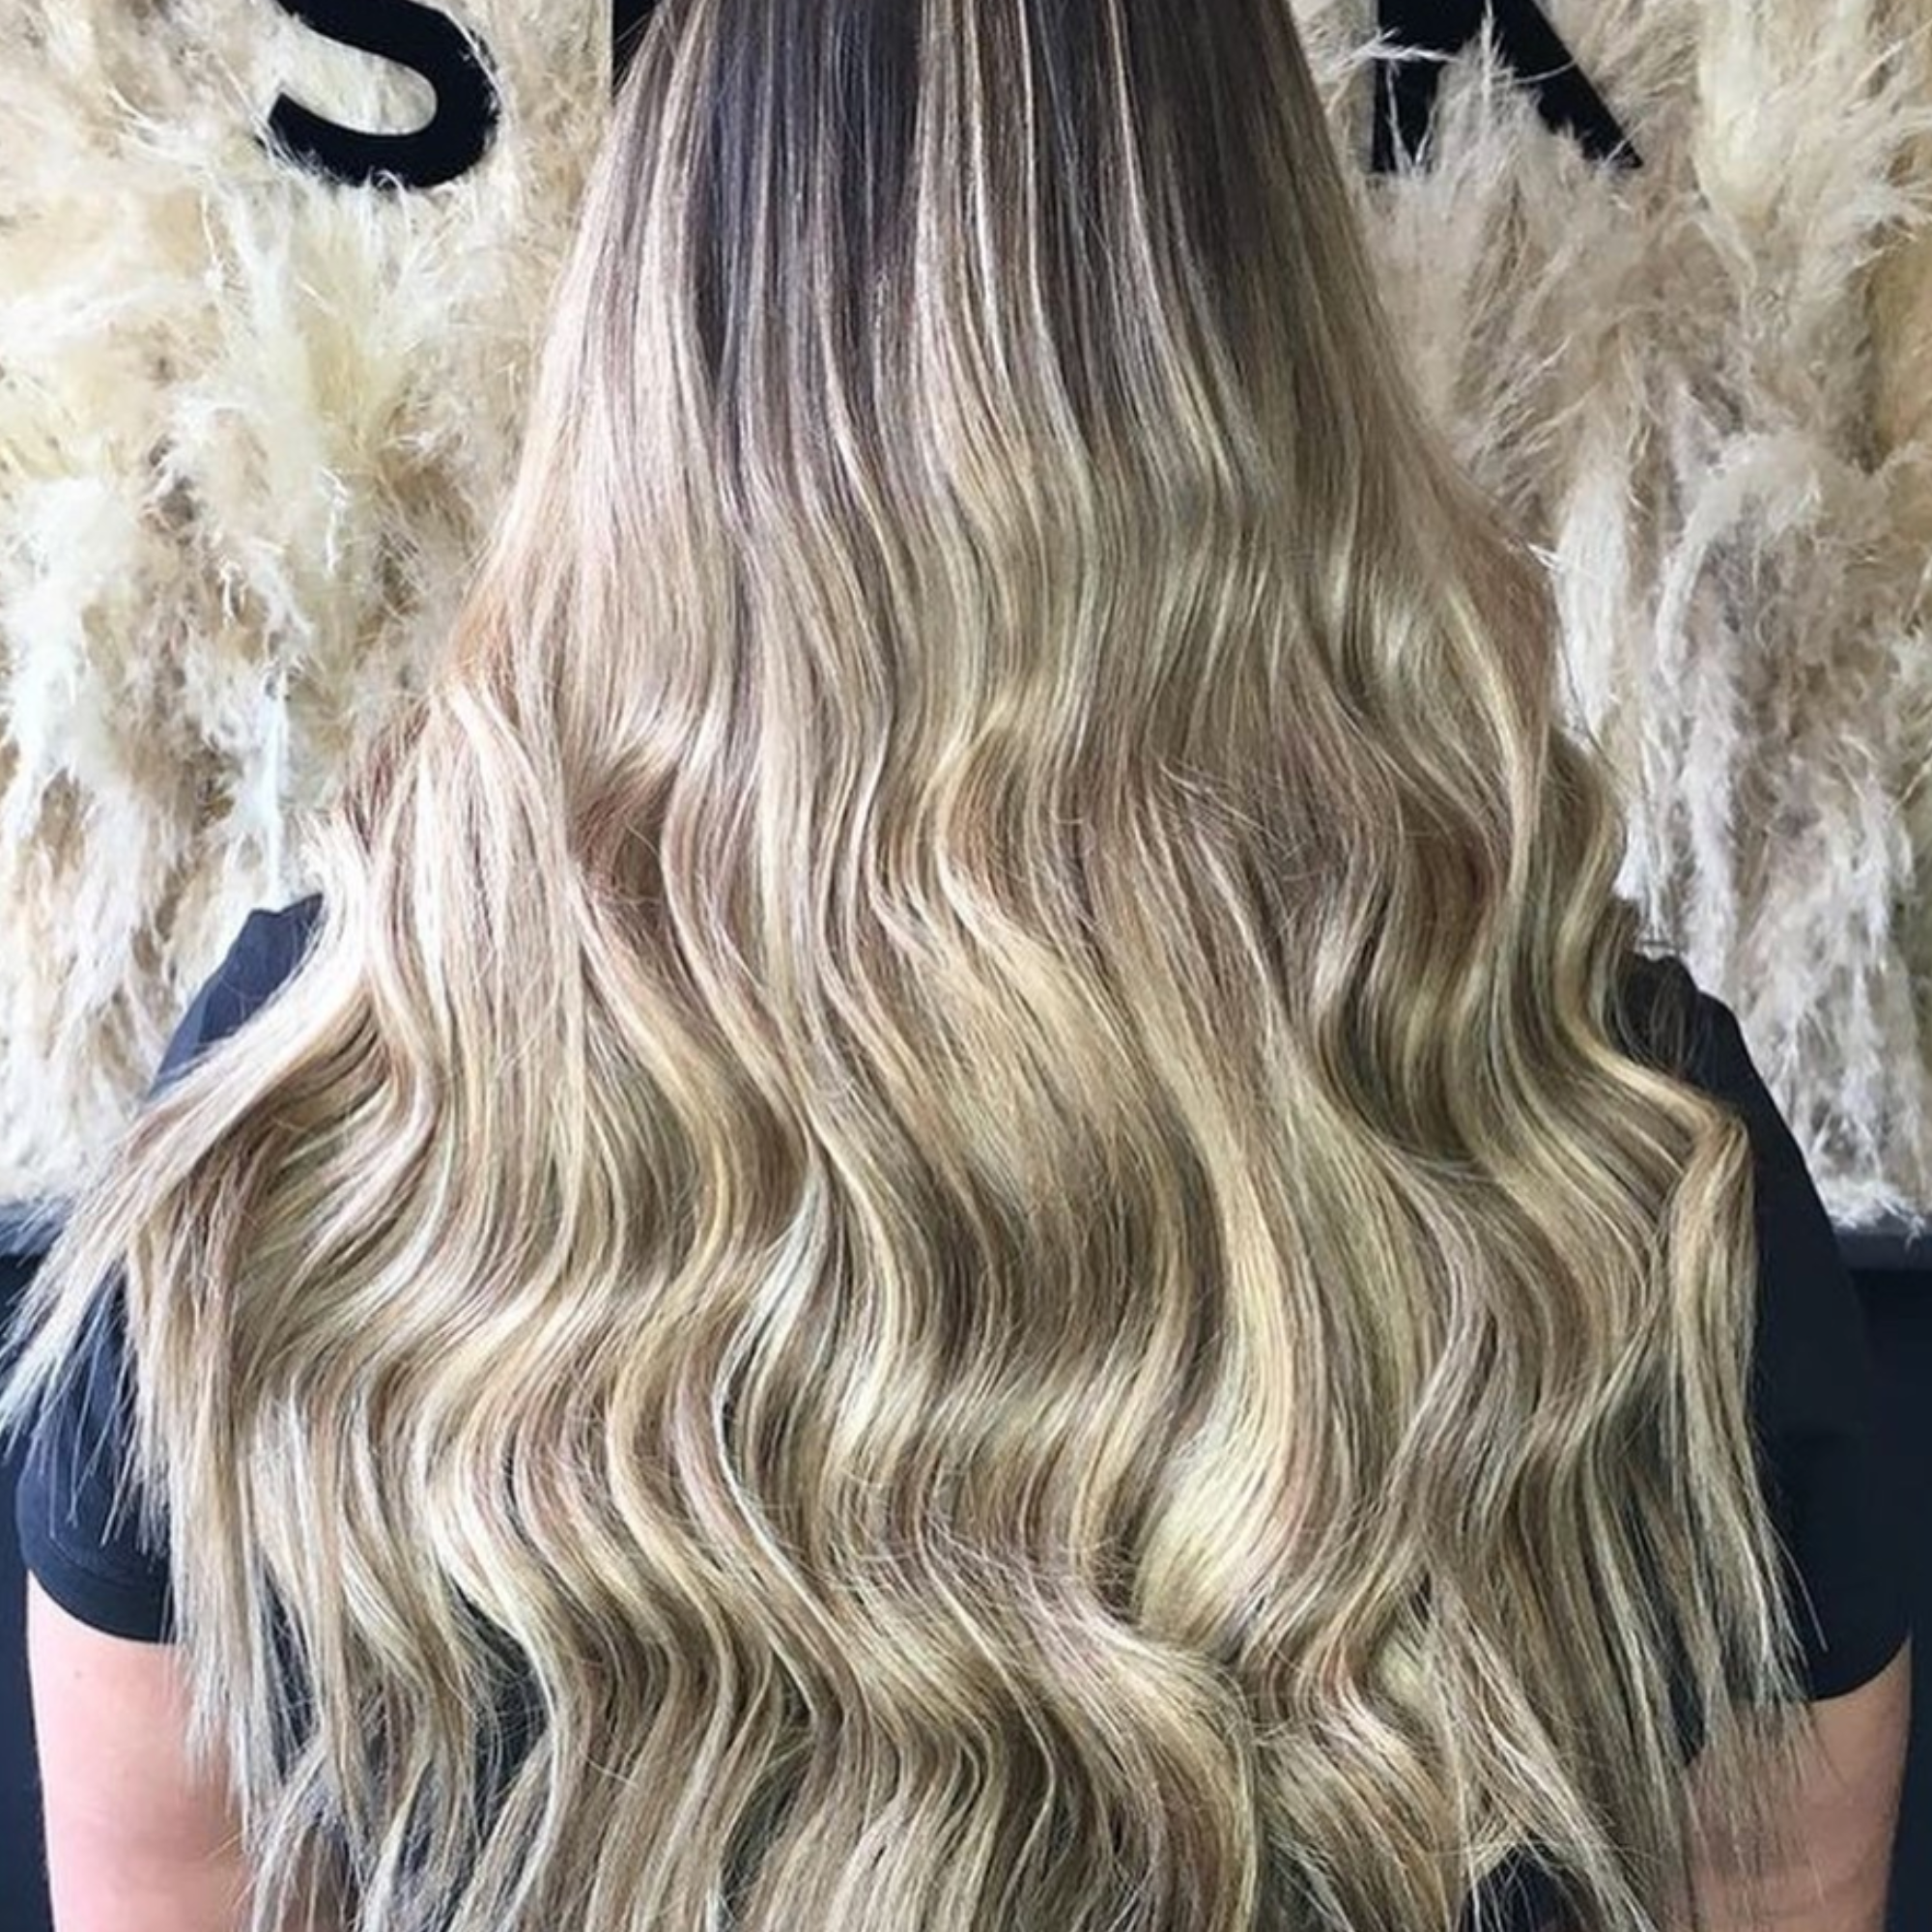 18" Stick Tip Extensions Rooted Coachella